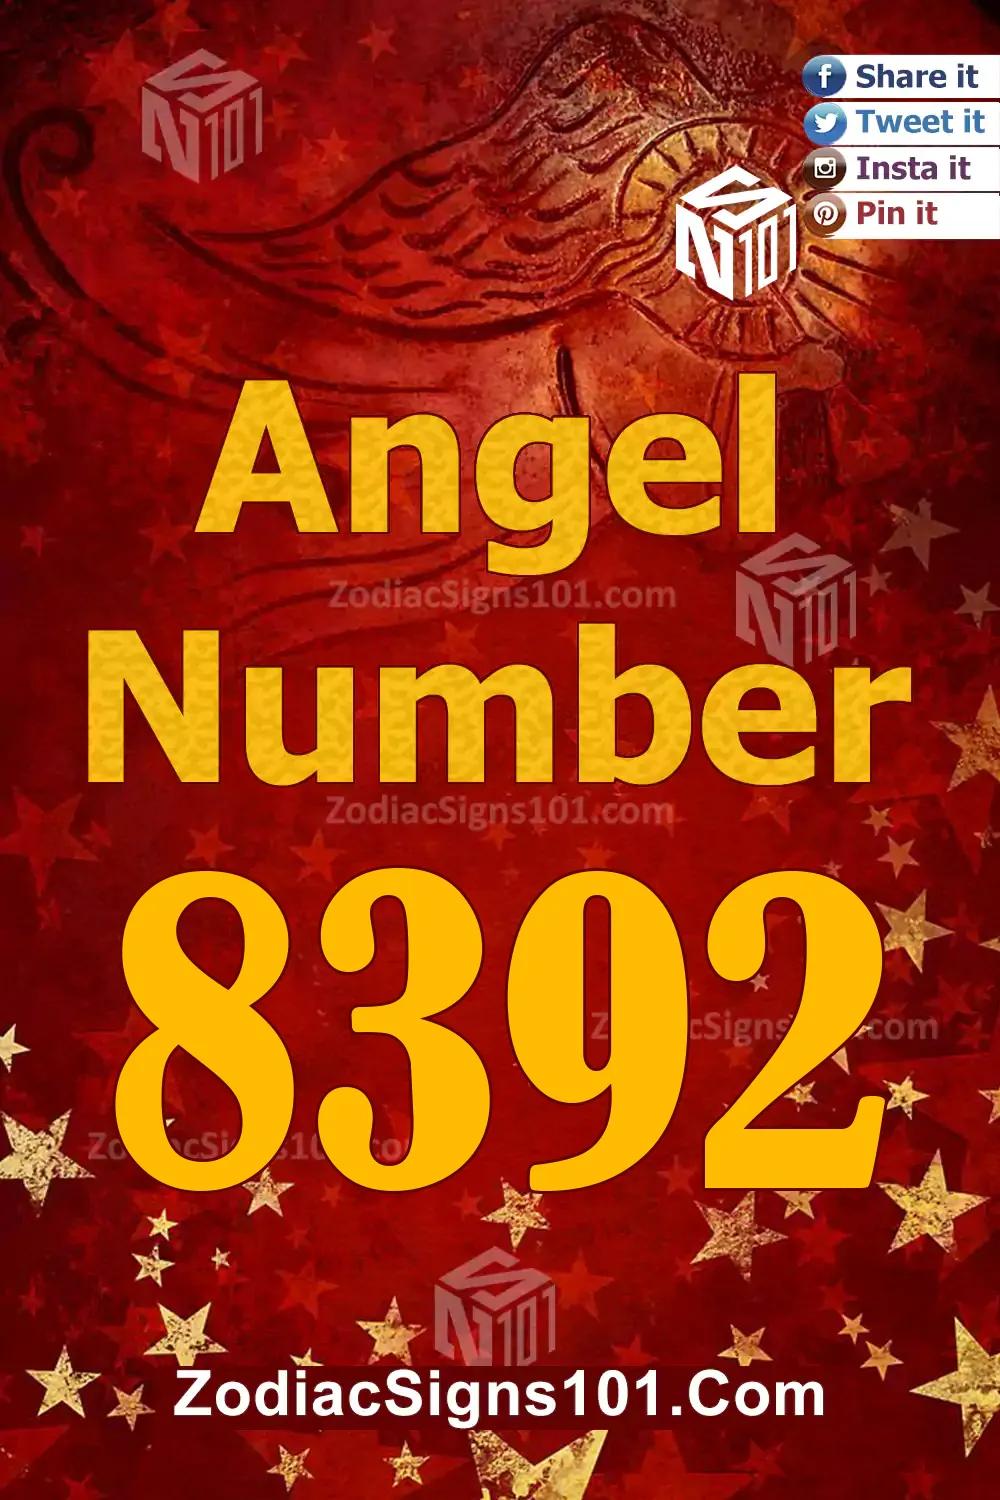 8392 Angel Number Meaning